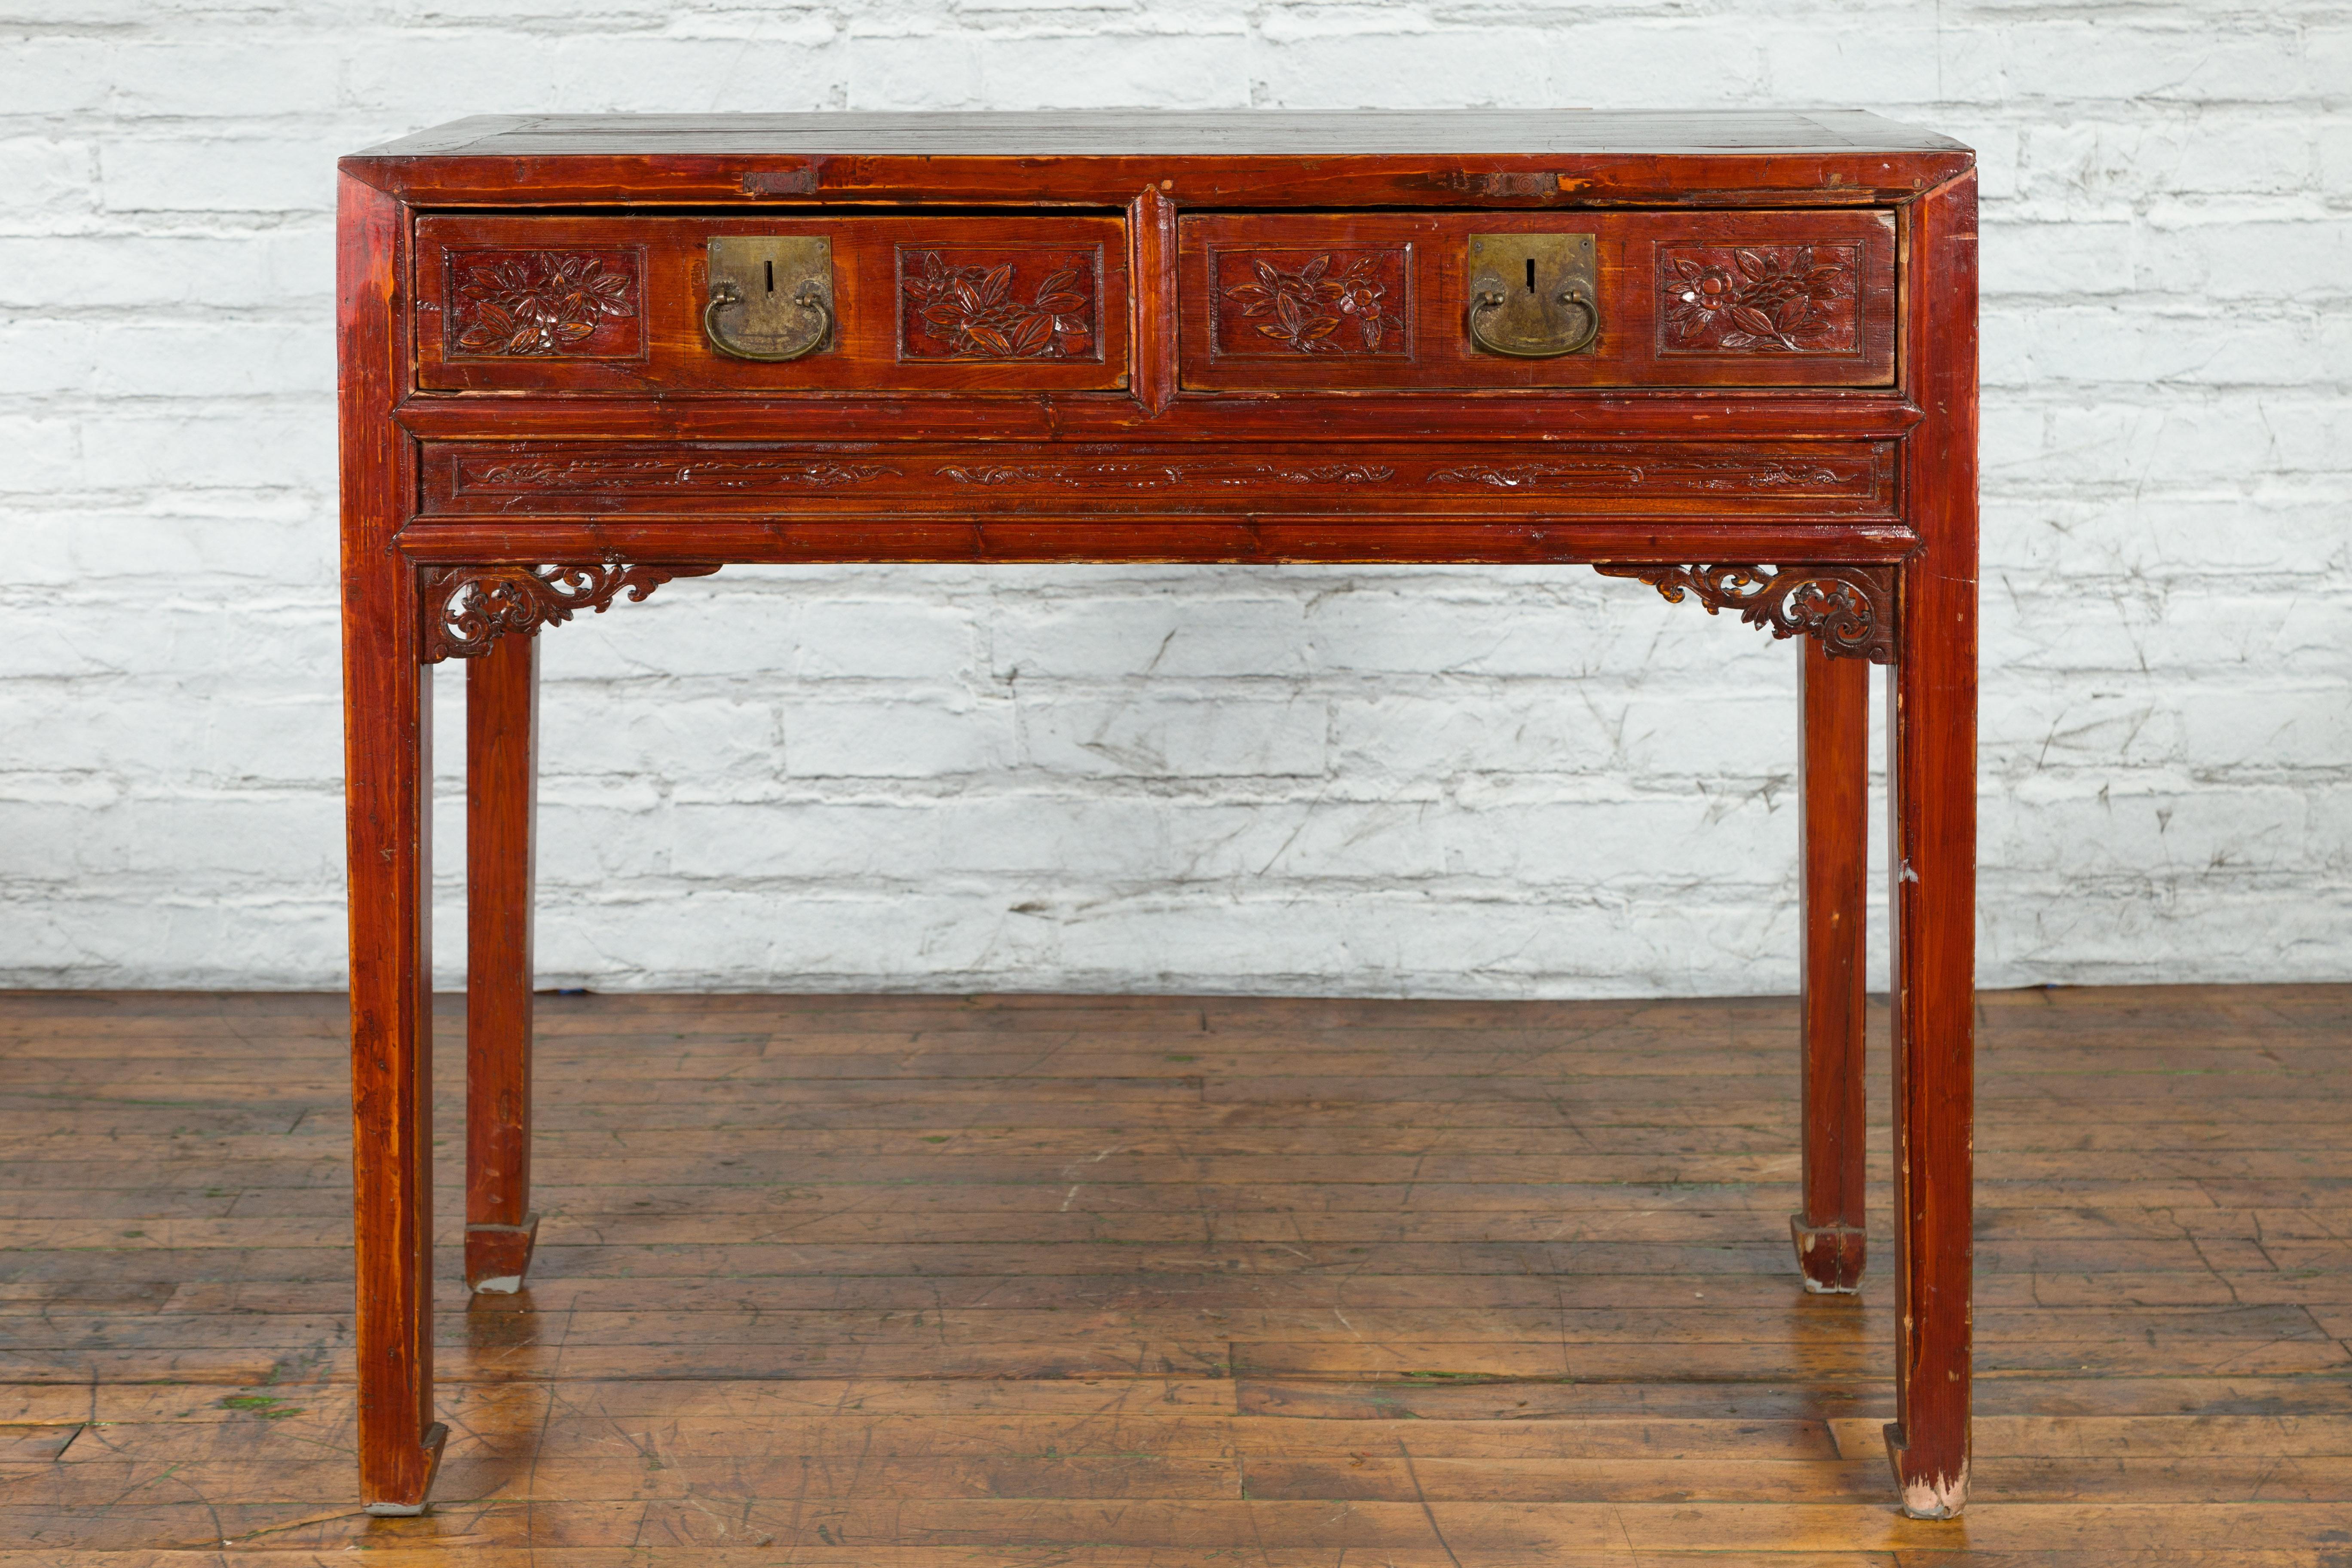 Carved Chinese Qing Dynasty Period 19th Century Reddish Brown Table with Two Drawers For Sale